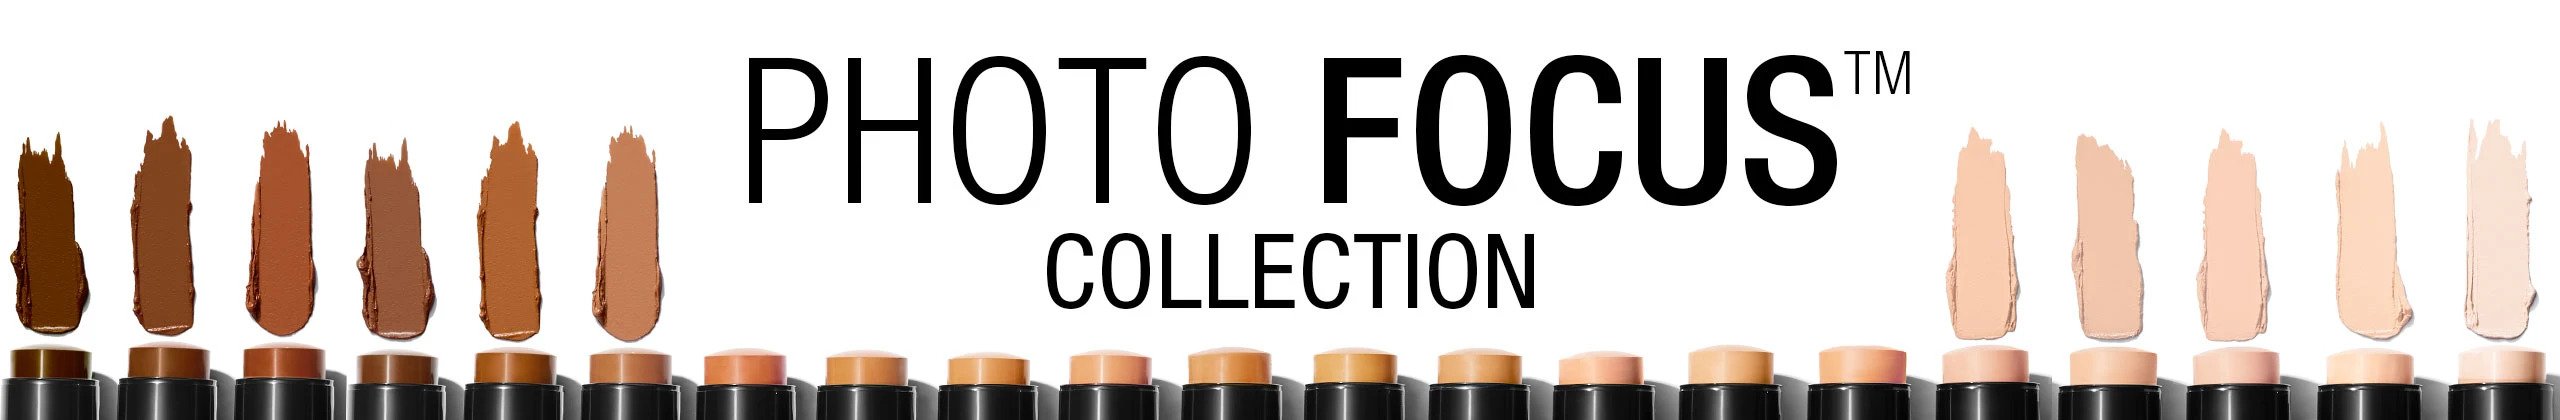 Photo Focus Collection Banner